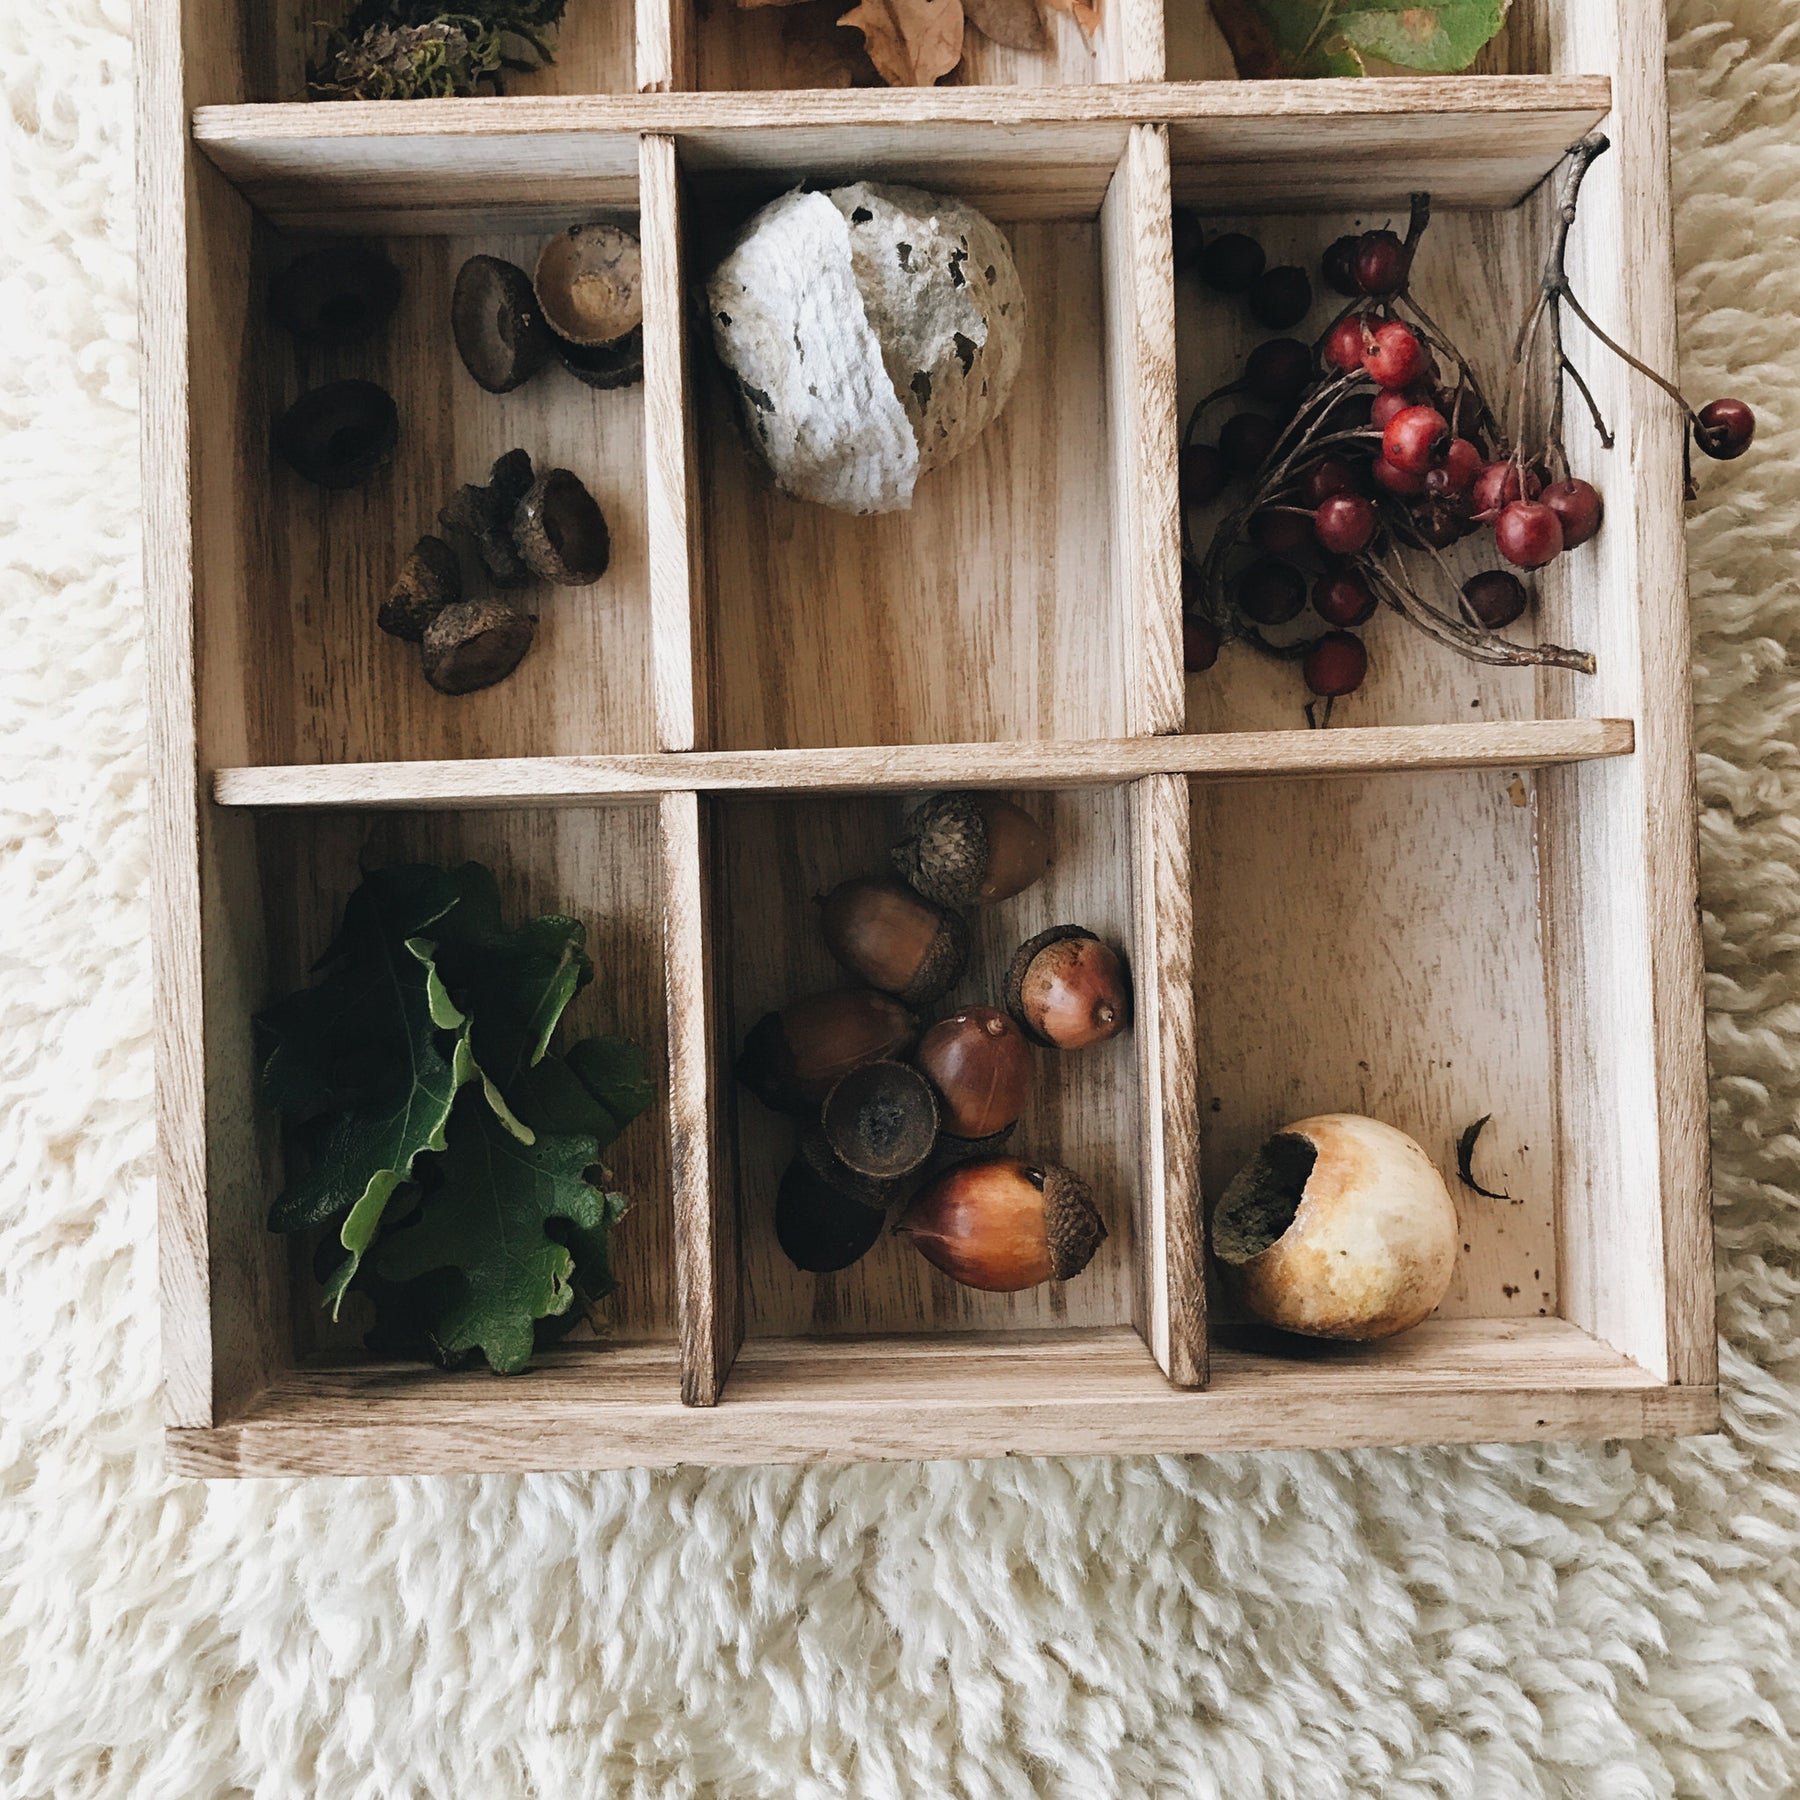 Nature Trays are a fun, intactive way to teach your children about the outdoors and collect the bits of nature they find interesting along the way!